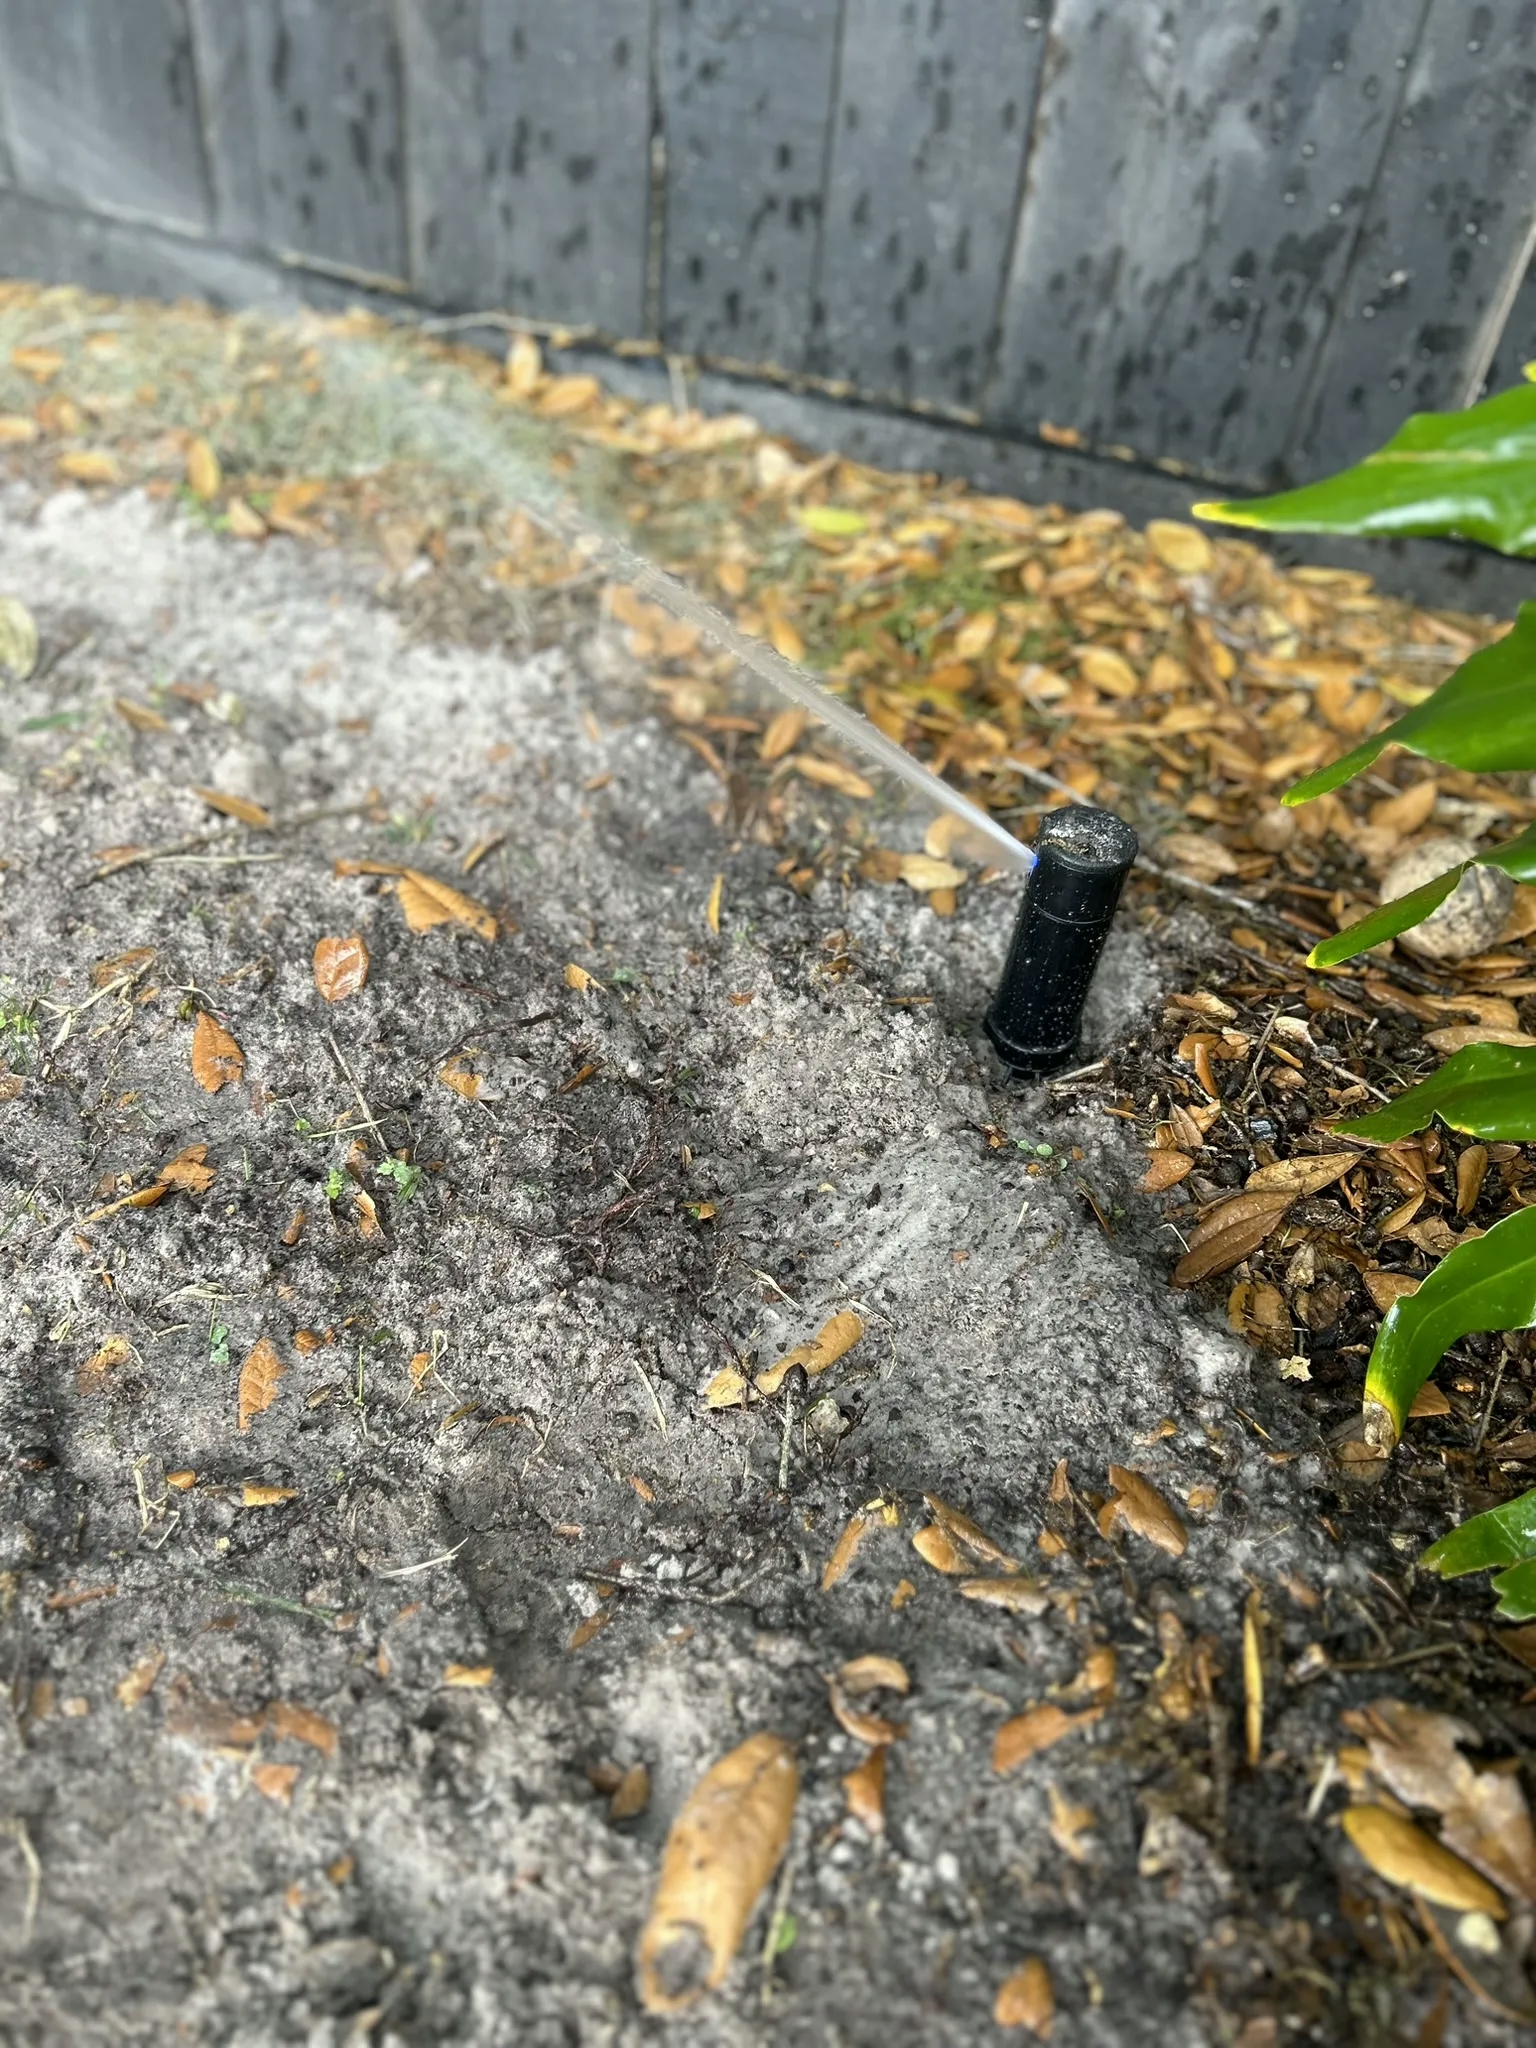 A black sprinkler head waters a dry, sandy patch of soil next to a wooden fence.